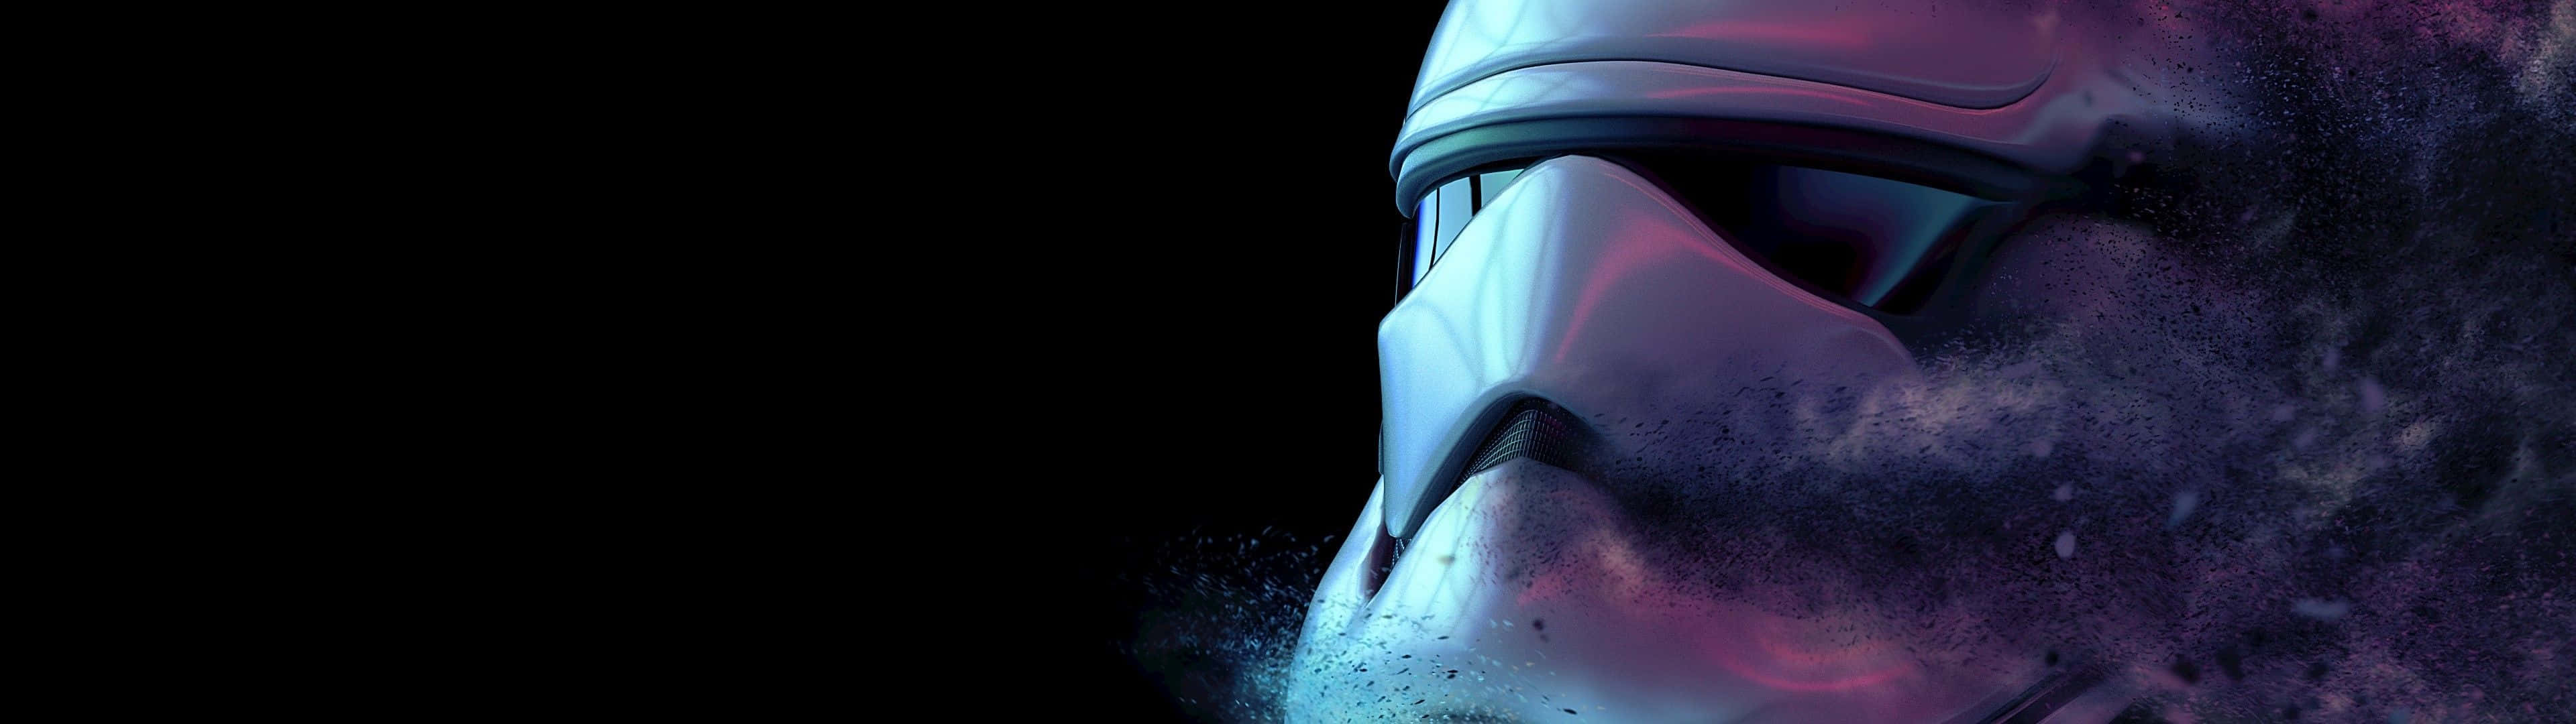 3840X1080 Stormtrooper Picture